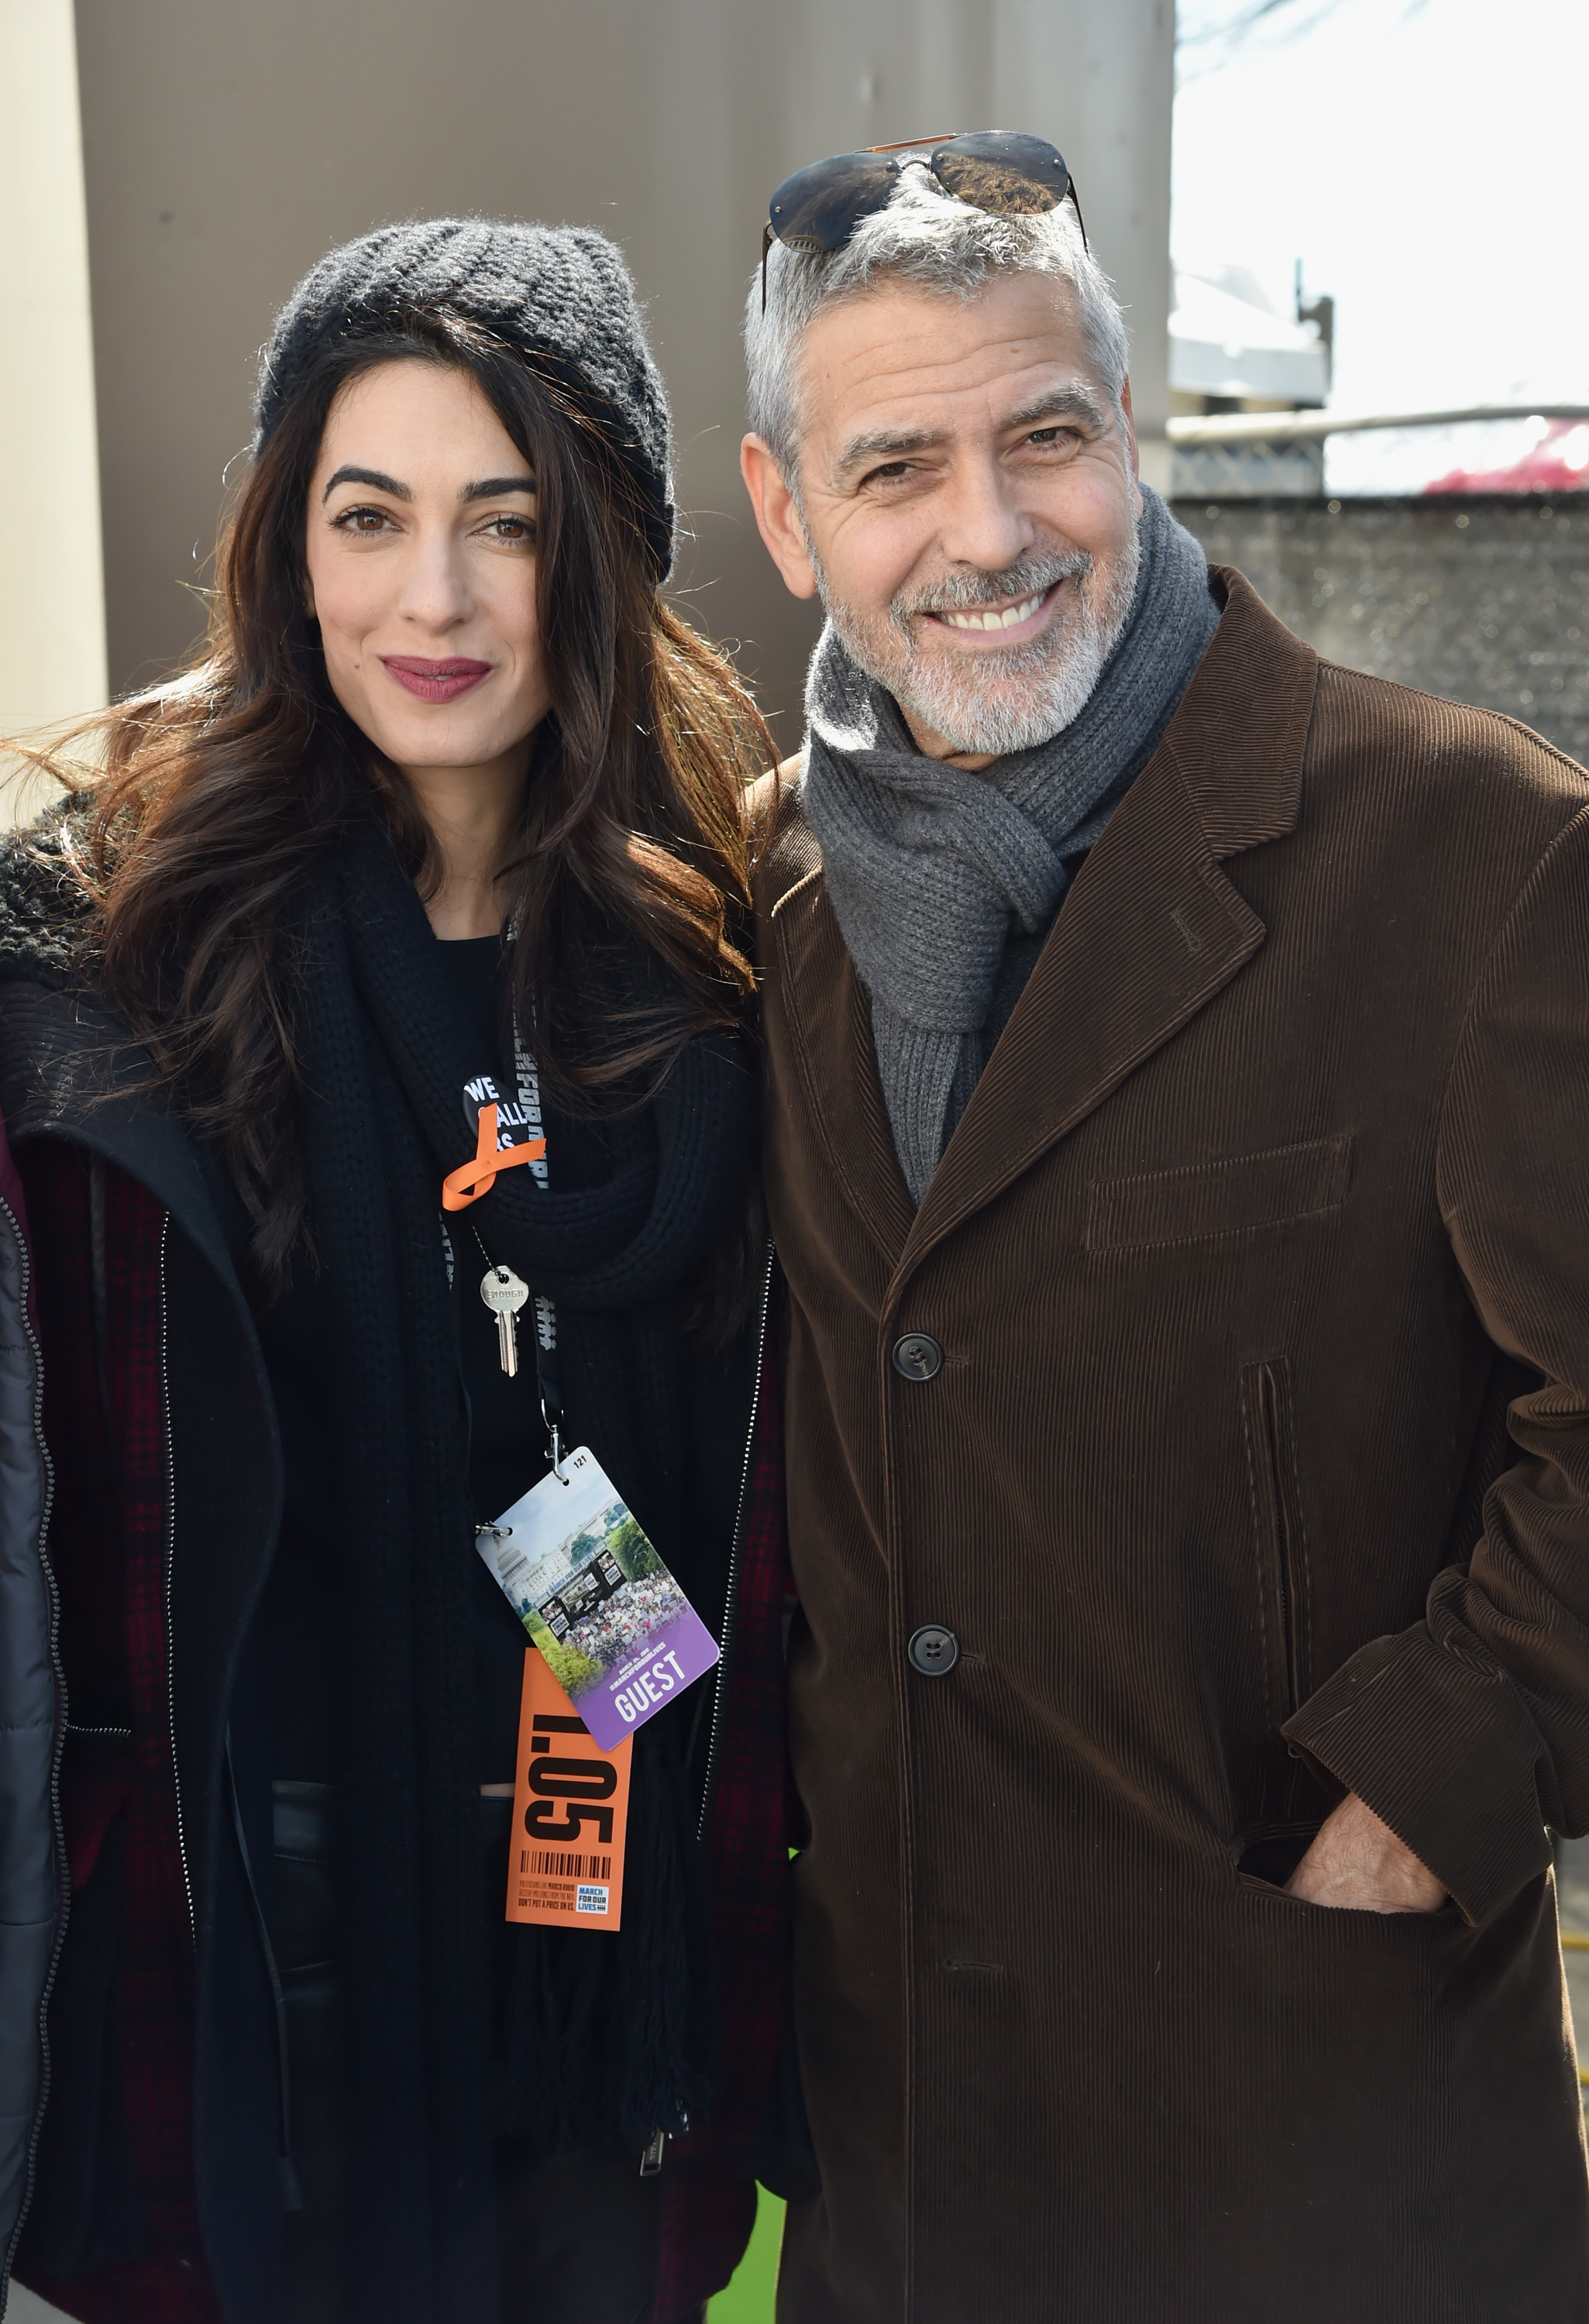 Amal Clooney and George Clooney attend March For Our Lives, on March 24, 2018, in Washington, DC.| Source: Getty Images